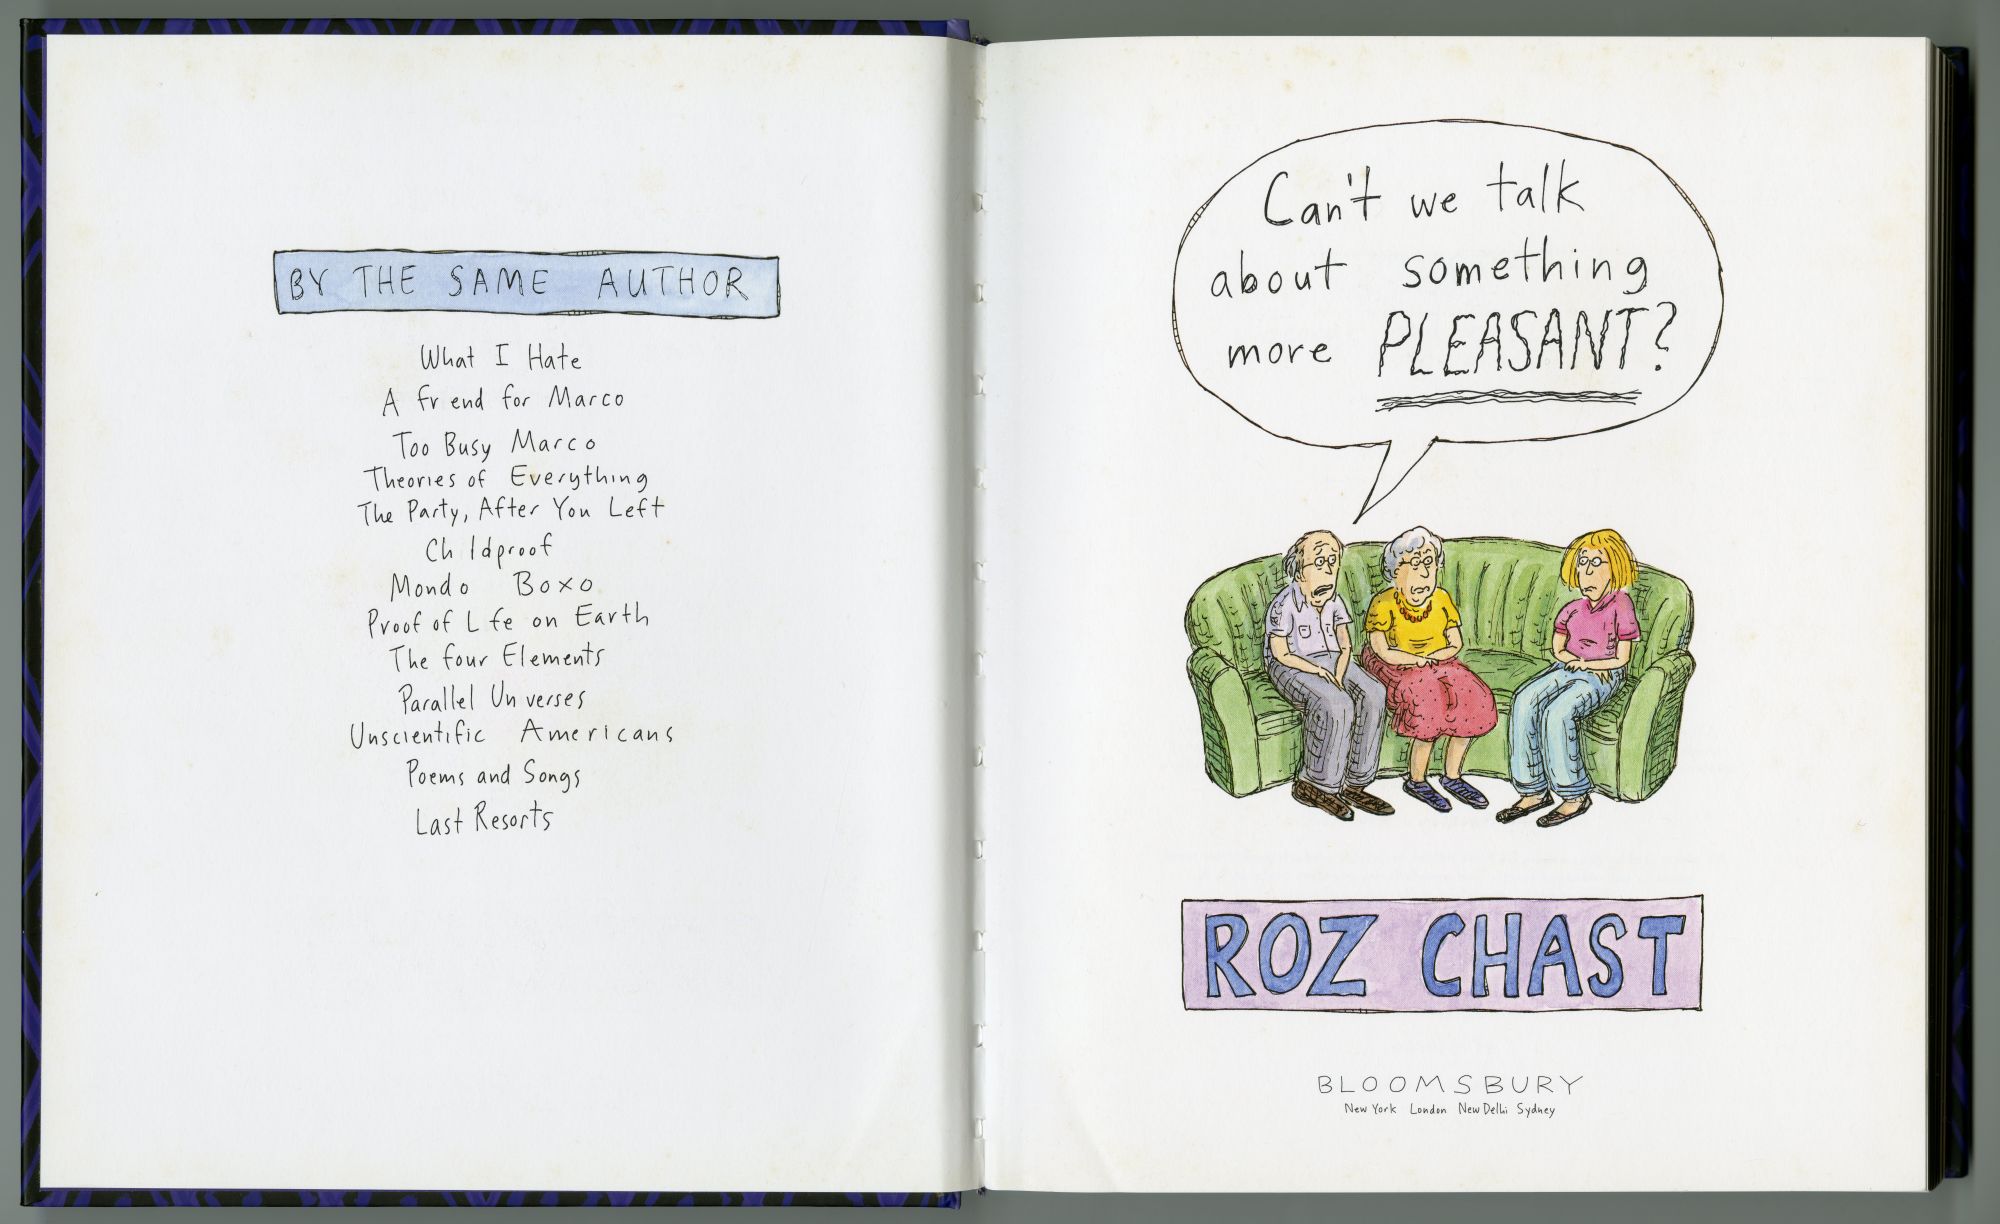 Roz Chast『Can't We Talk About Something More Pleasant?』（2014年、Bloomsbury） 扉